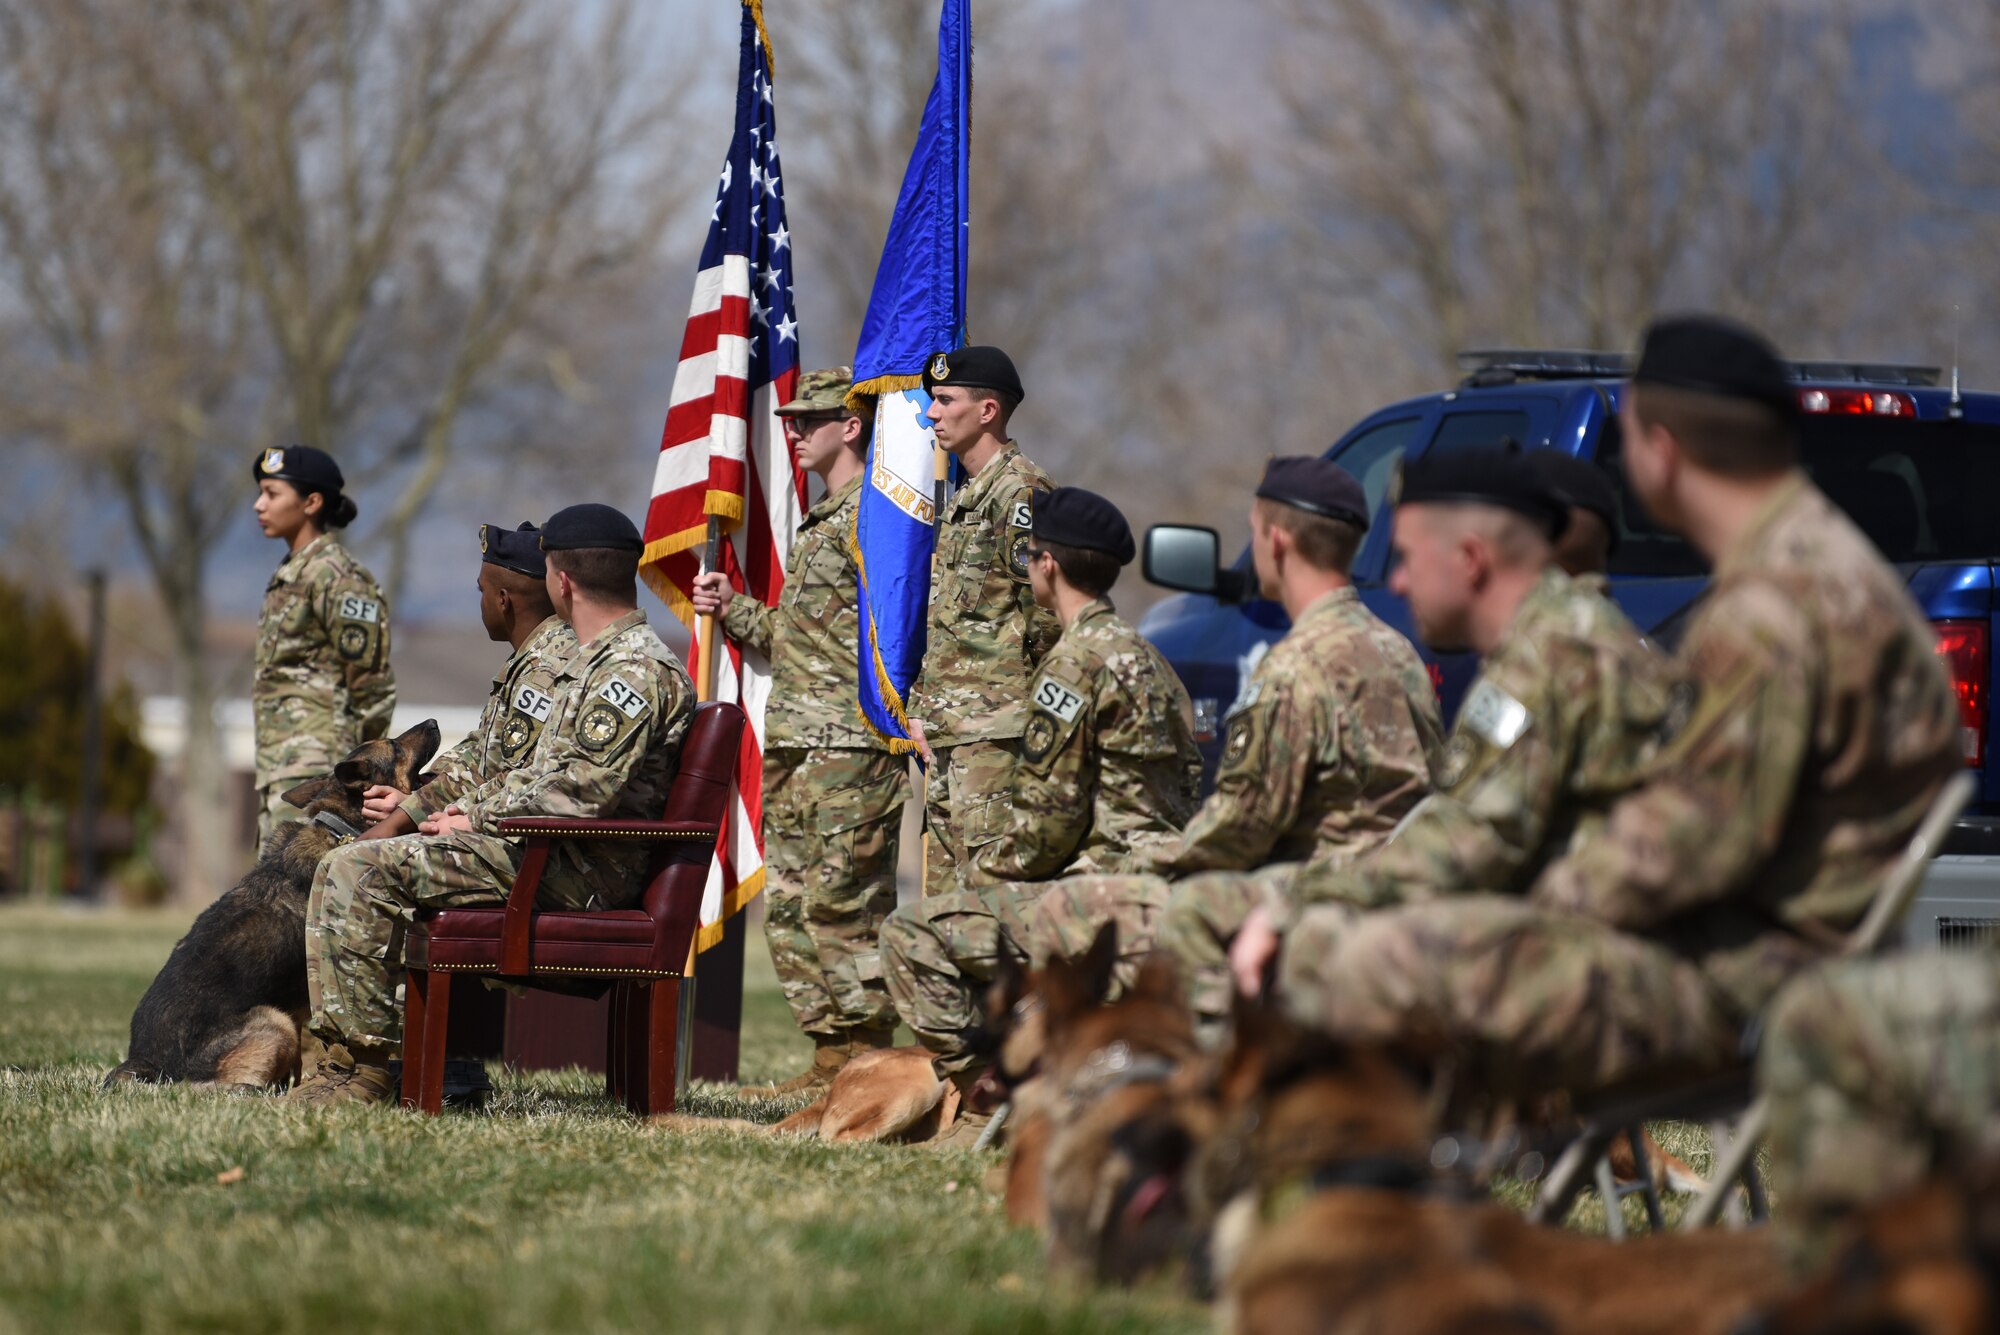 Military Working Dog Boris, far left, is retired after eight years of service at Kirtland Air Force Base, N.M., March 26, 2019. During his career, he had 85 drug finds and deployed to Afghanistan. (U.S. Air Force photo by Senior Airman Eli Chevalier)